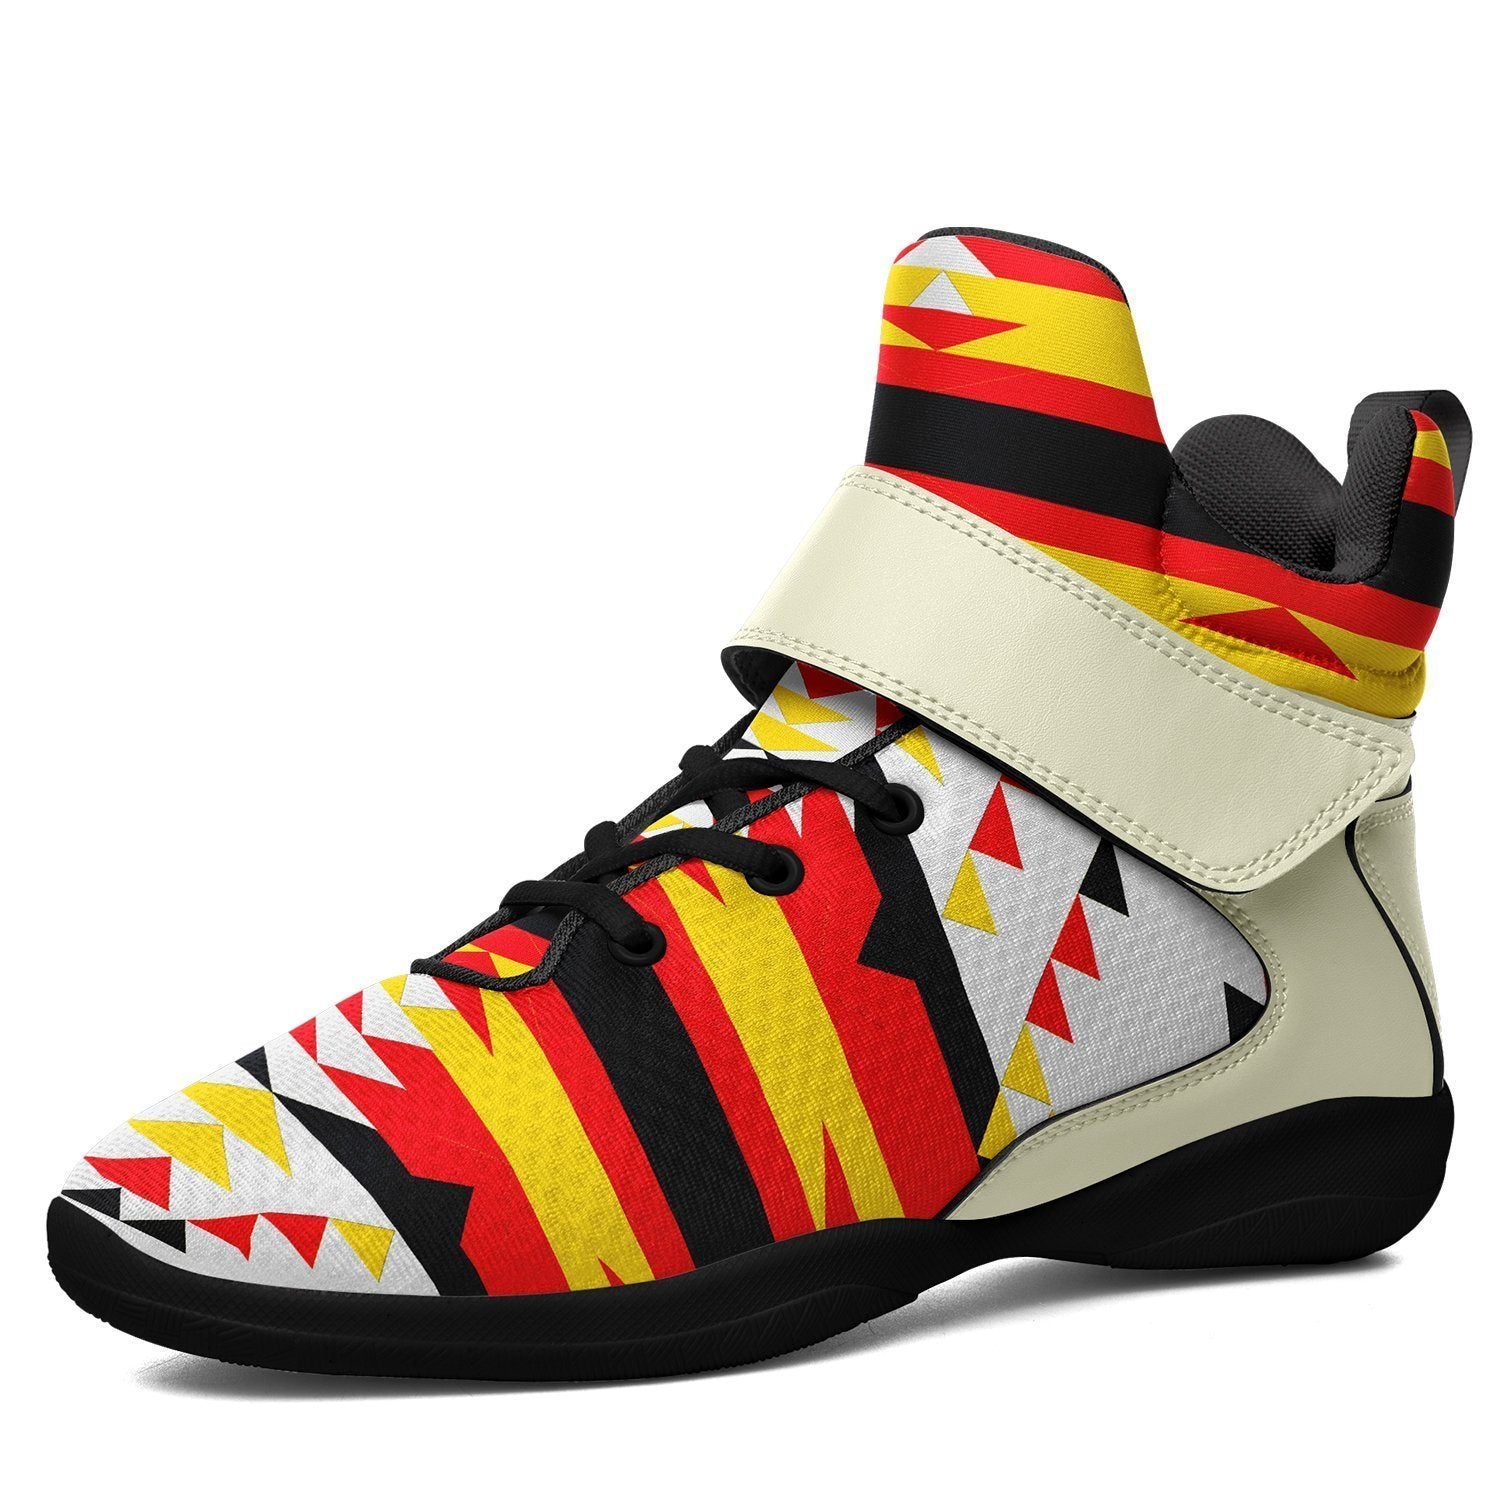 Visions of Peace Directions Ipottaa Basketball / Sport High Top Shoes - Black Sole 49 Dzine US Men 7 / EUR 40 Black Sole with Cream Strap 